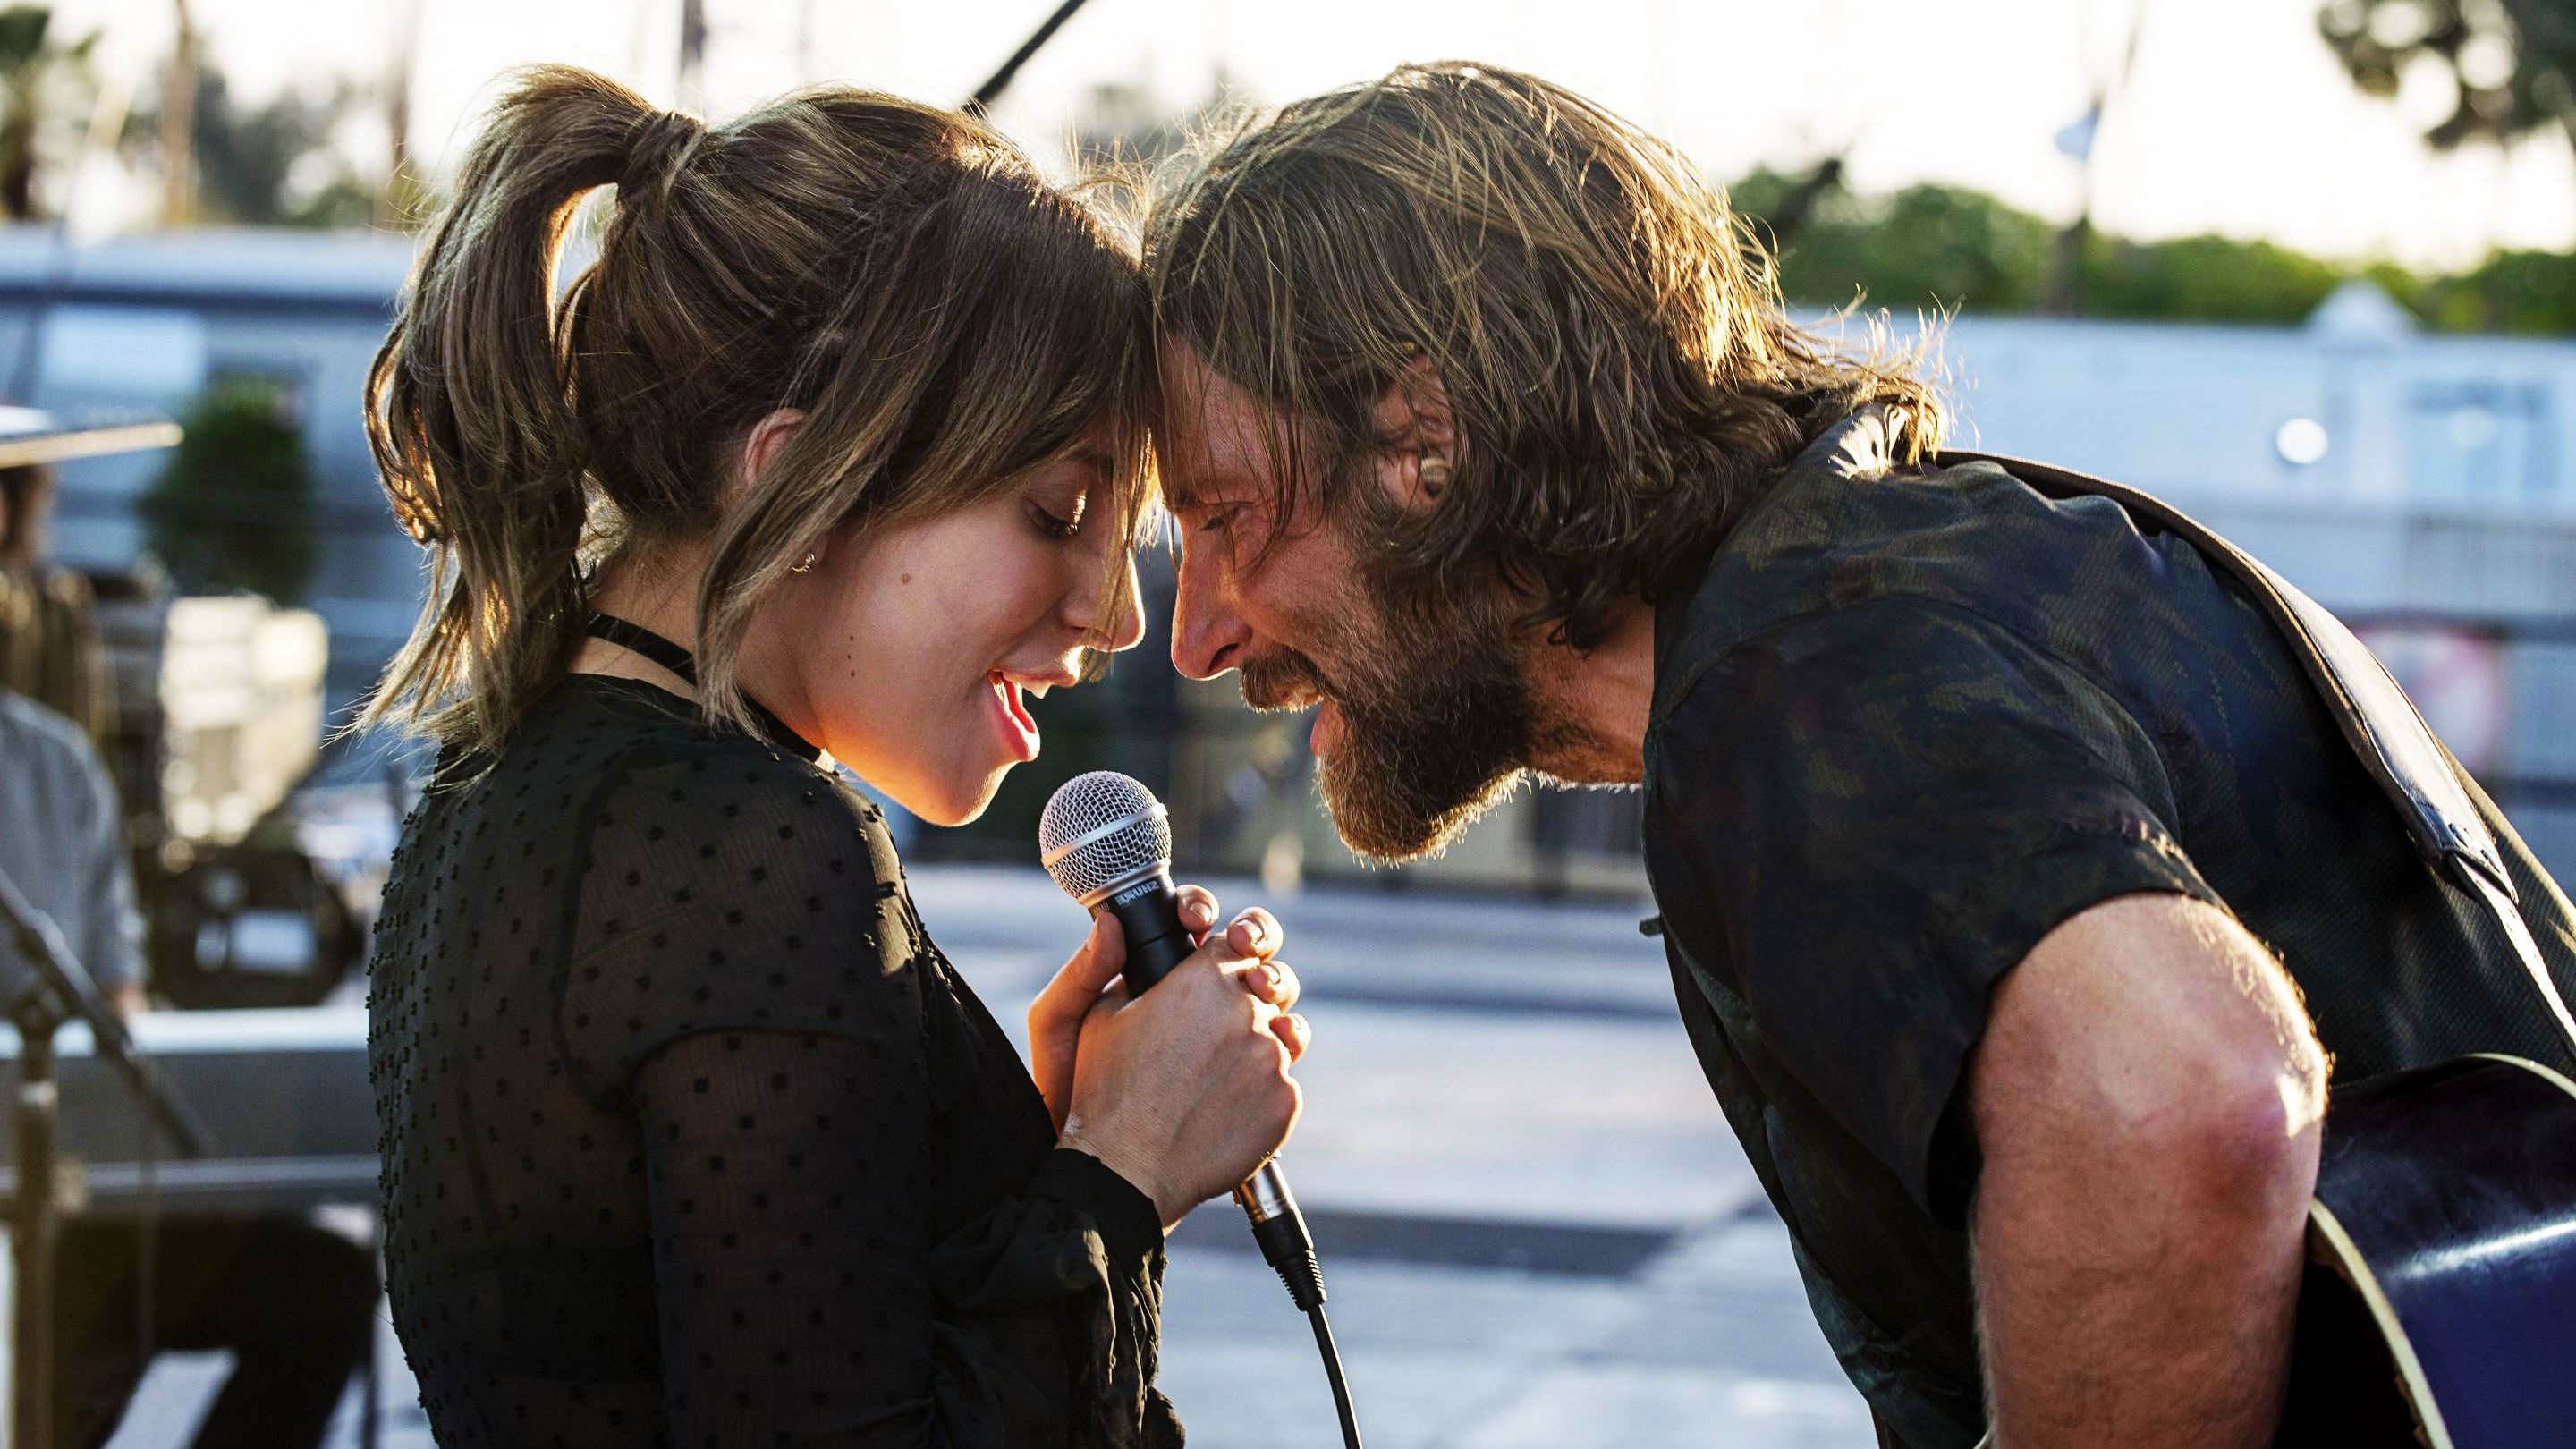 A Star Is Born 10 Best Actor Directorial Debuts Ranked According to IMDb